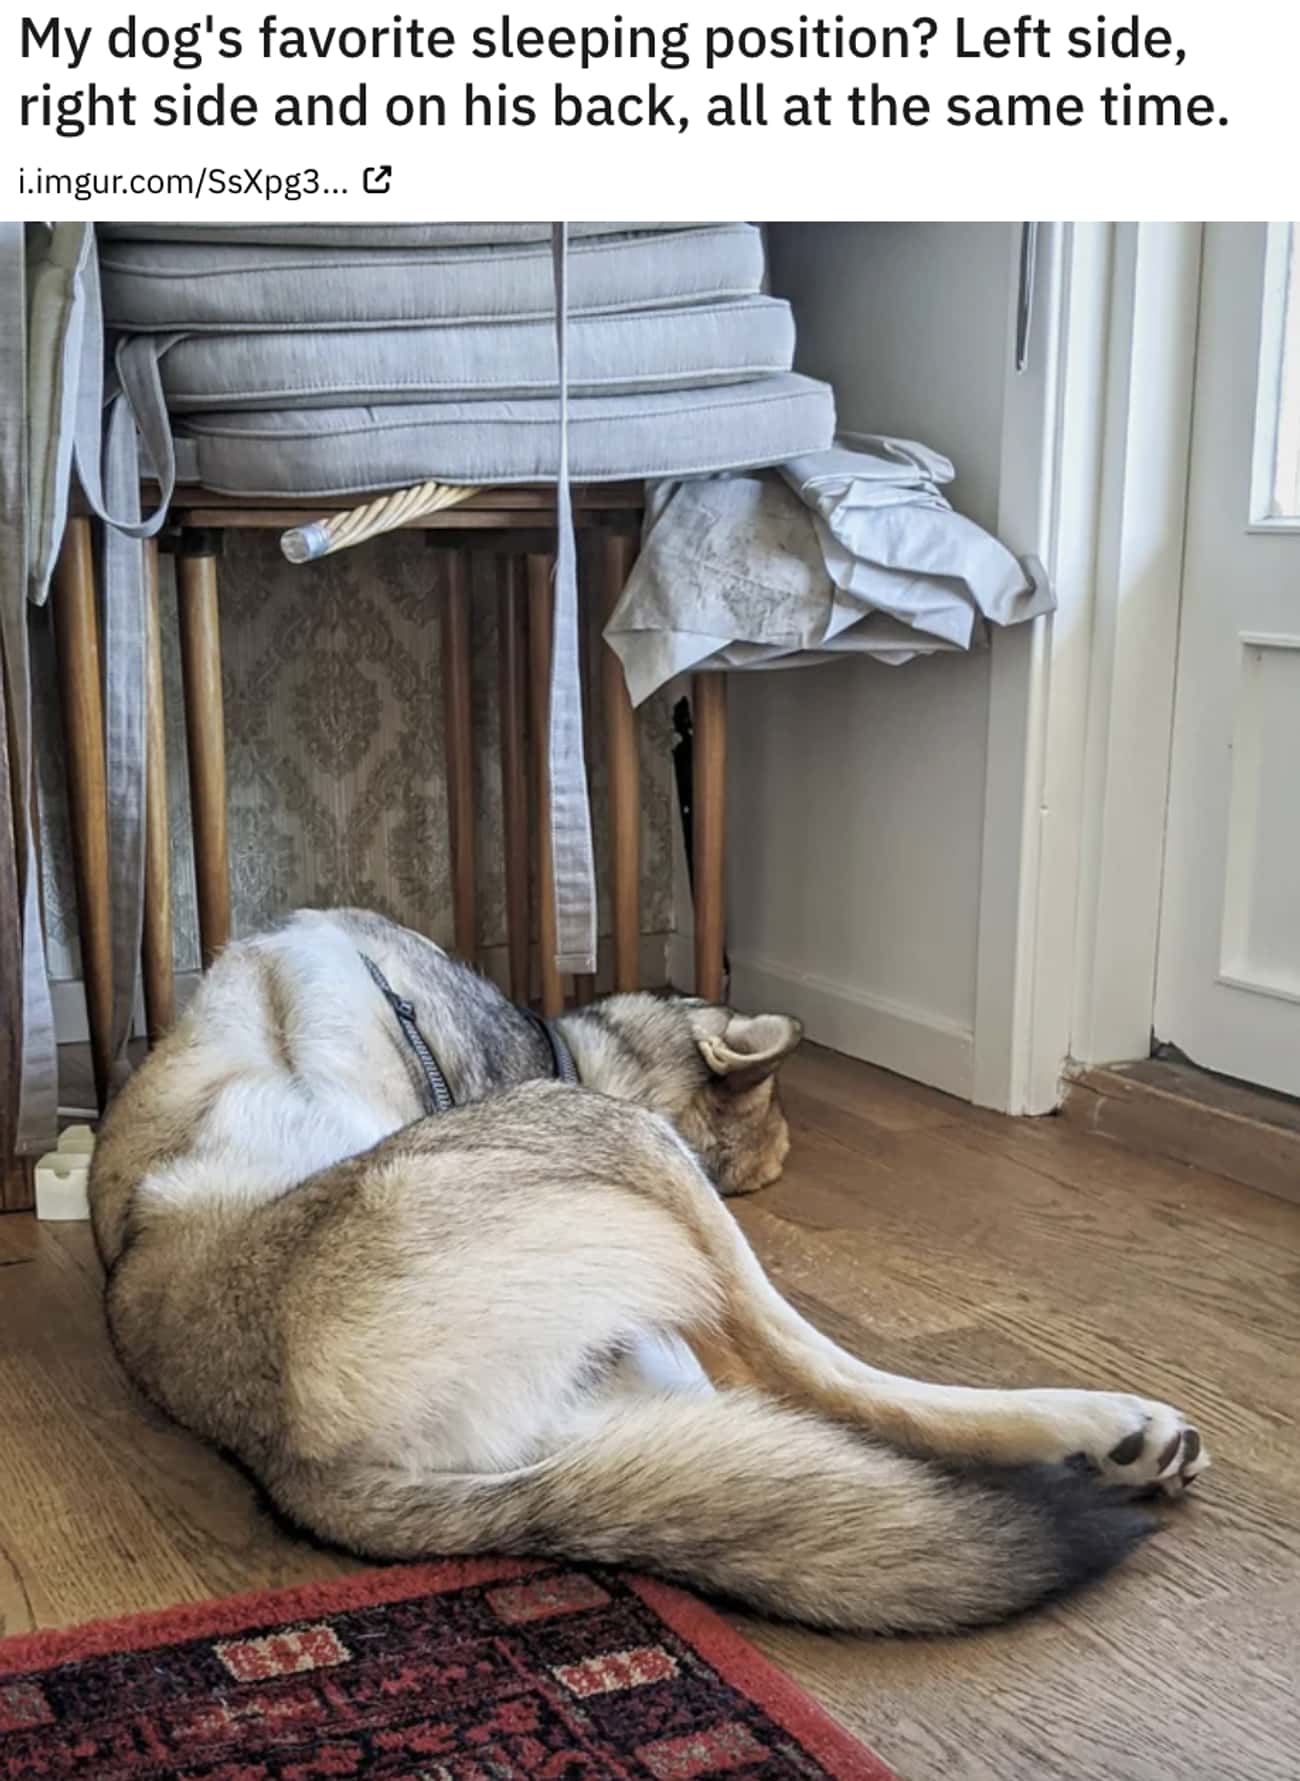 How Is That Possibly Comfortable?